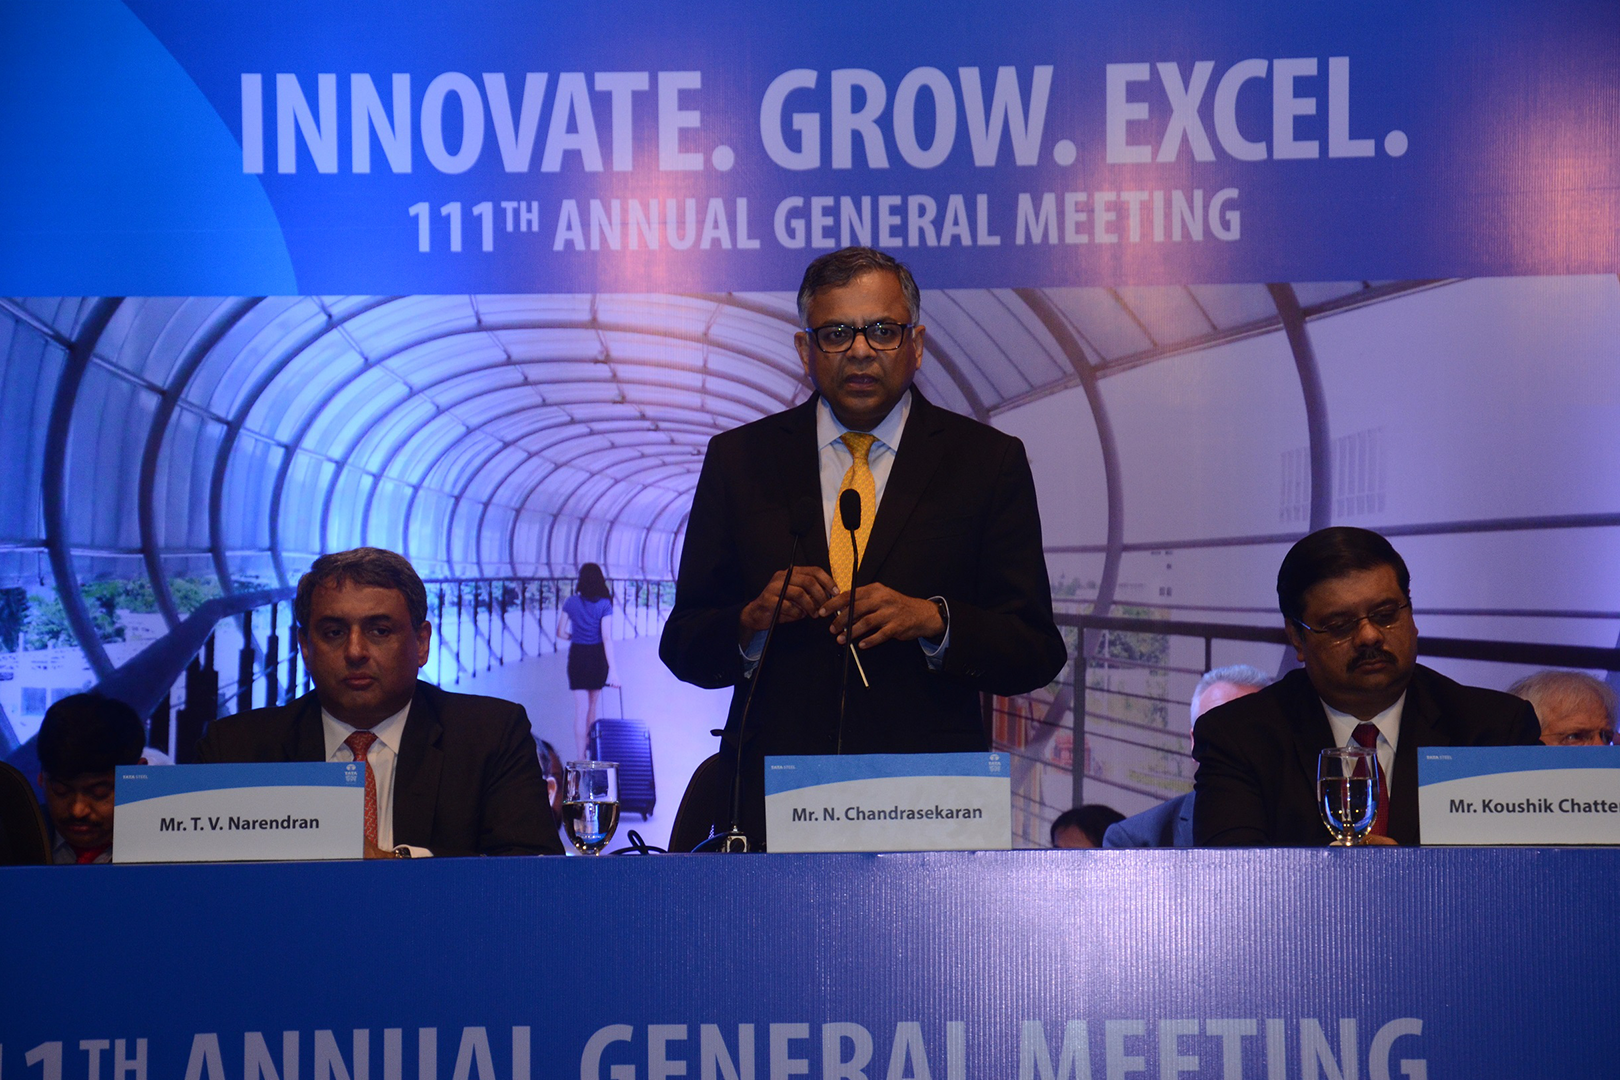 113th Annual General Meeting of Tata Steel Limited 